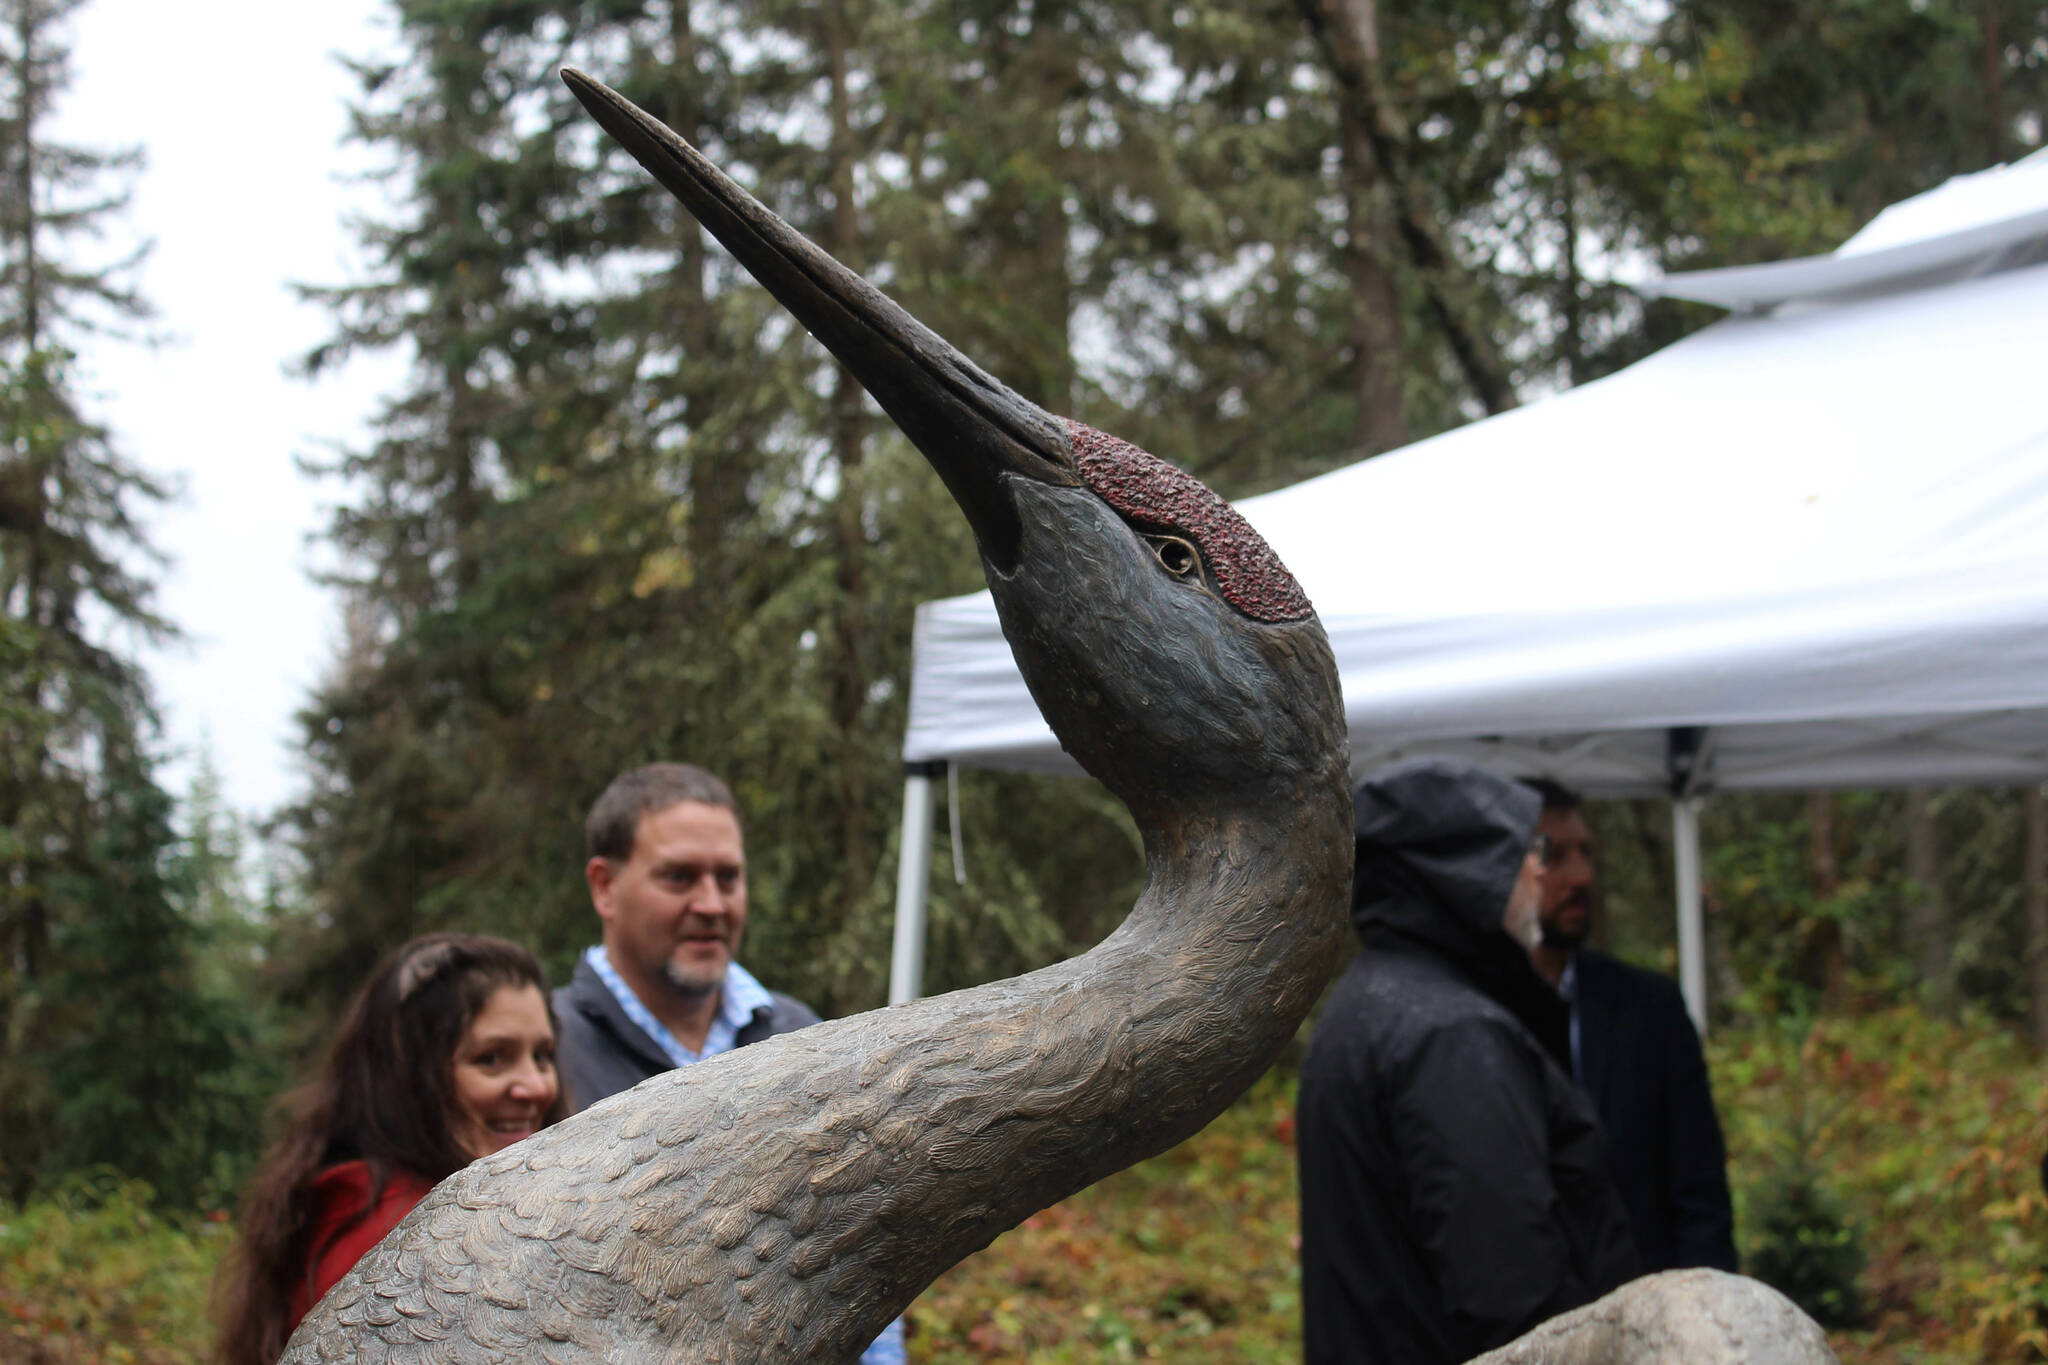 Visitors look at a peace crane statue unveiled as part of the grand opening and dedication of the Kenai Peninsula Peace Crane Garden Trails on Thursday, Sept. 8, 2022, in Soldotna, Alaska. (Ashlyn O’Hara/Peninsula Clarion)